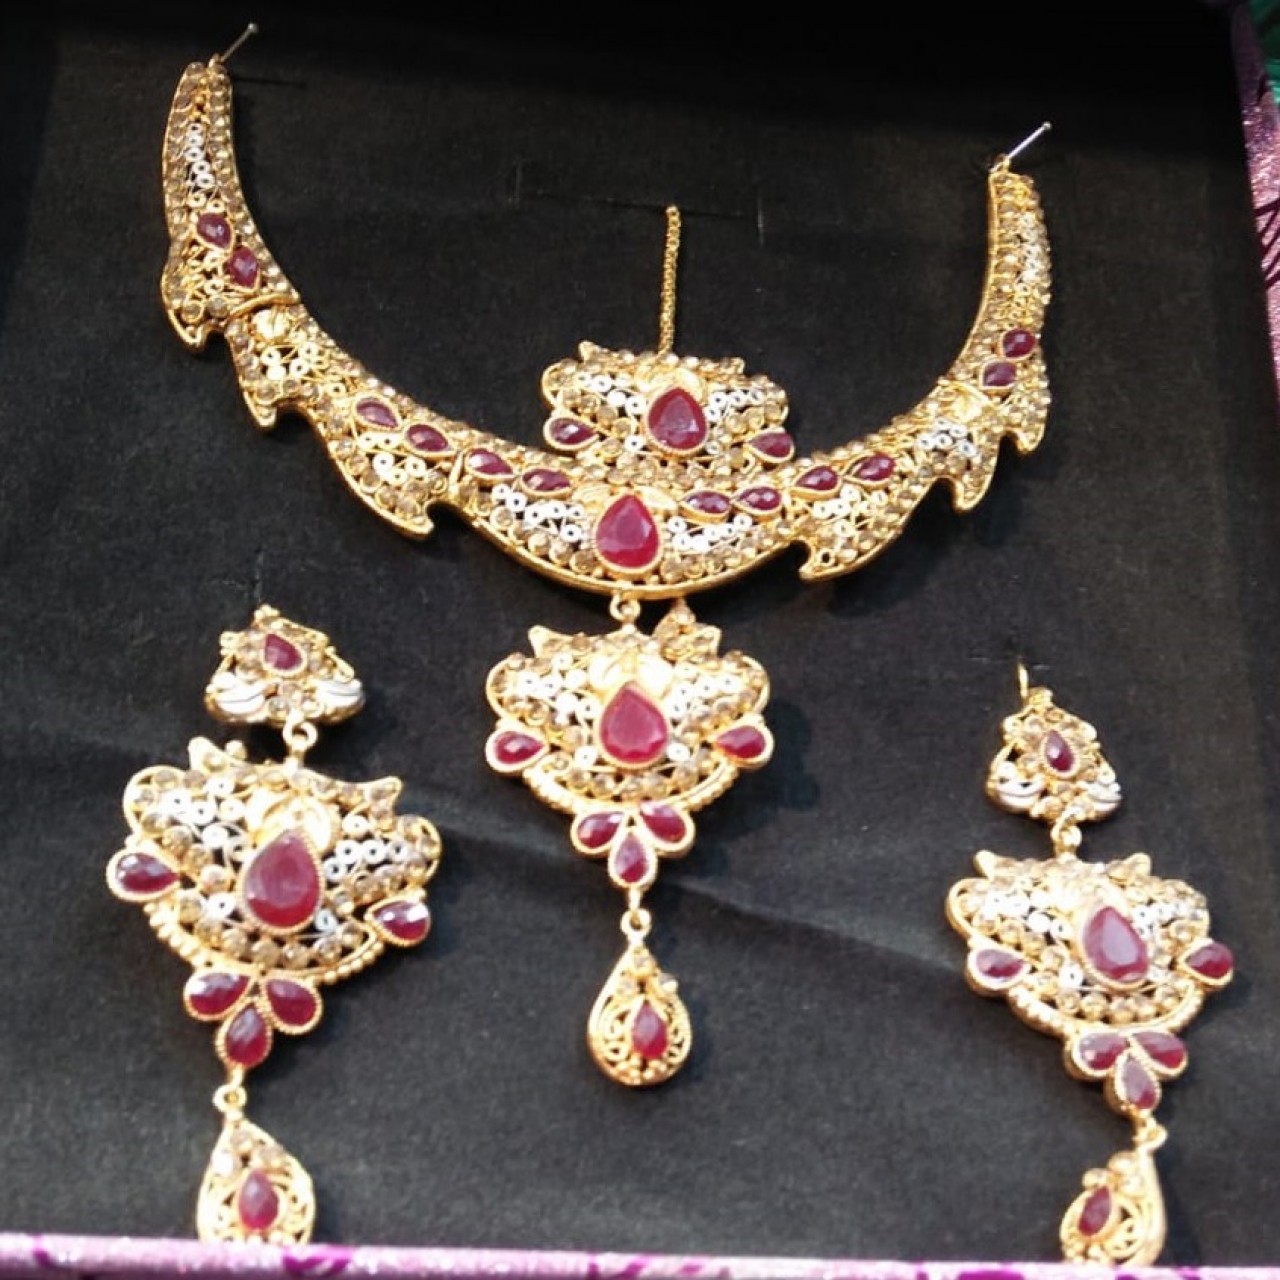 Neckless, Earrings & Bindya Jewelry Set For Women - Casting Material